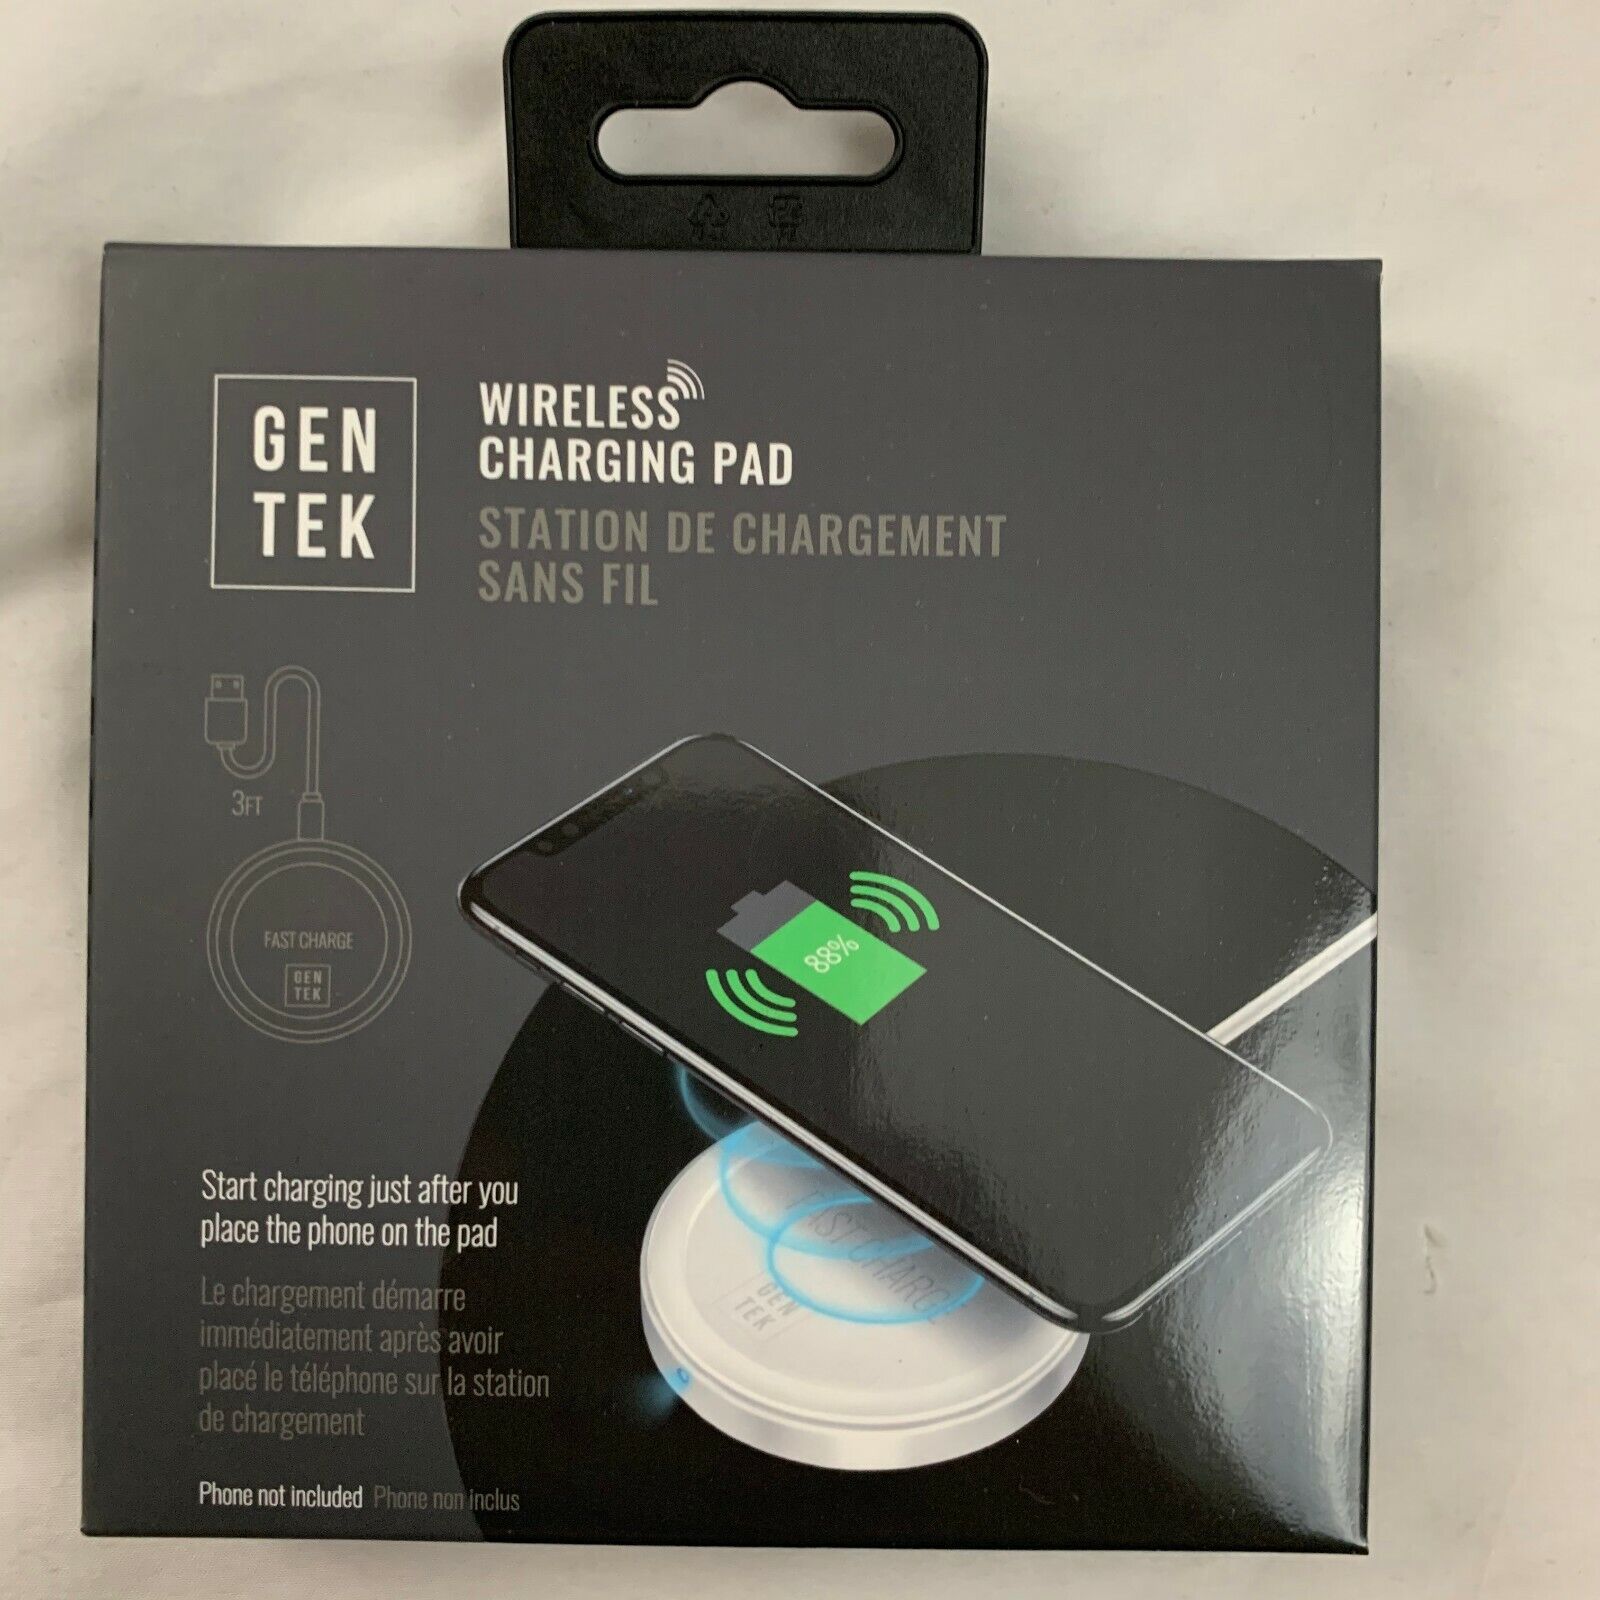 A BRAND NEW, UN-OPENED GEN TEK WIRELESS CHARGING PAD FOR YOUR MOBILE PHONE FAST